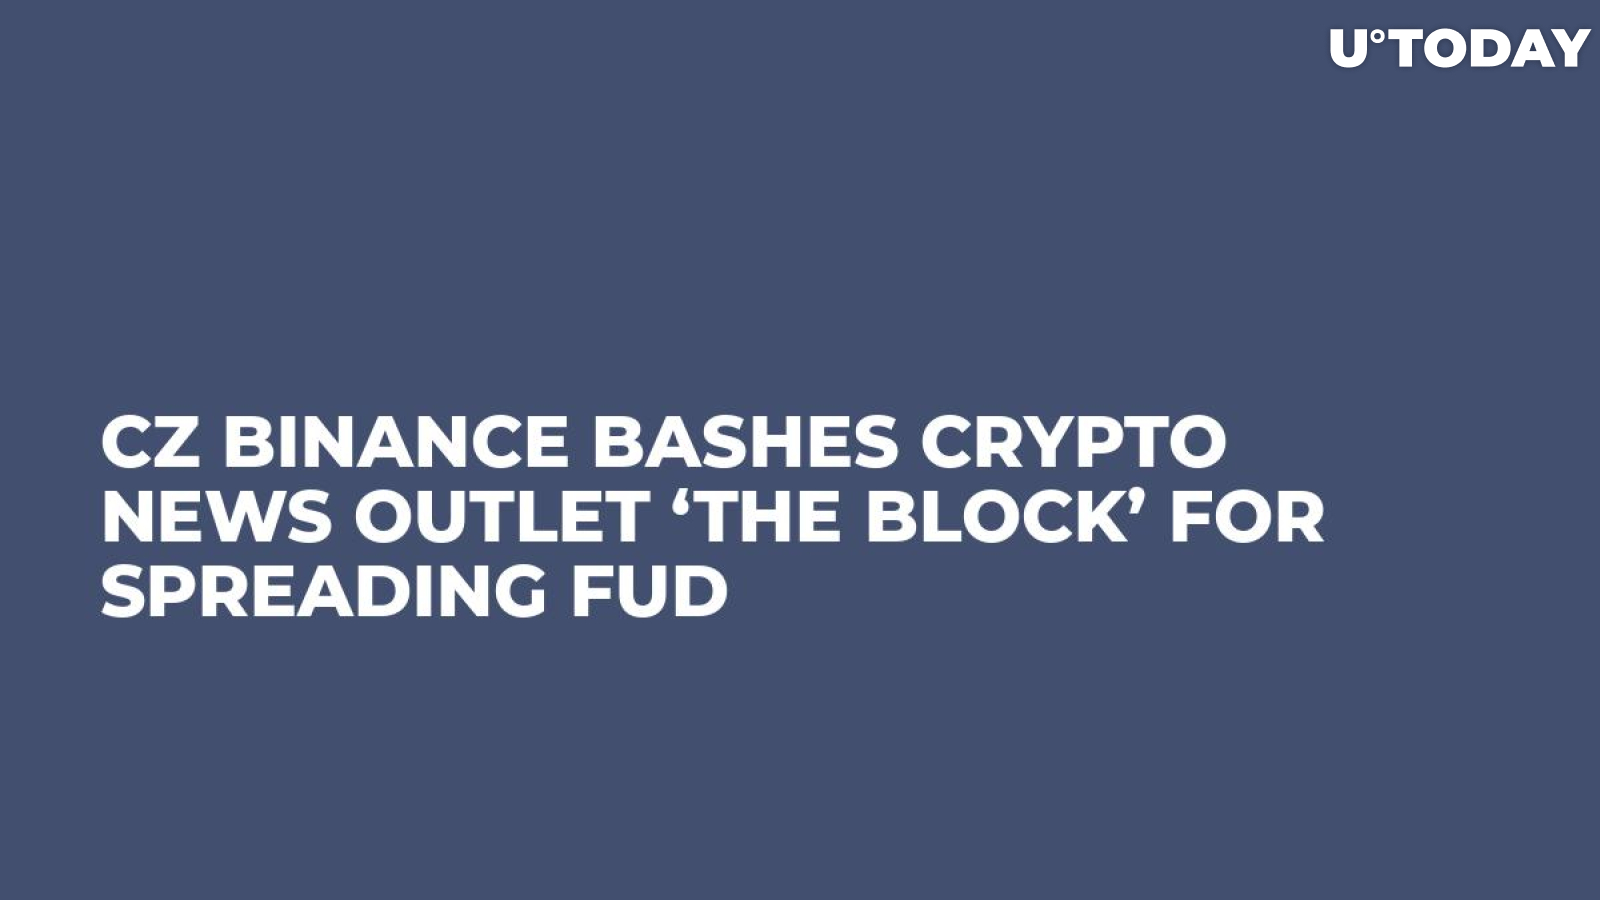 CZ Binance Bashes Crypto News Outlet ‘The Block’ for Spreading FUD 